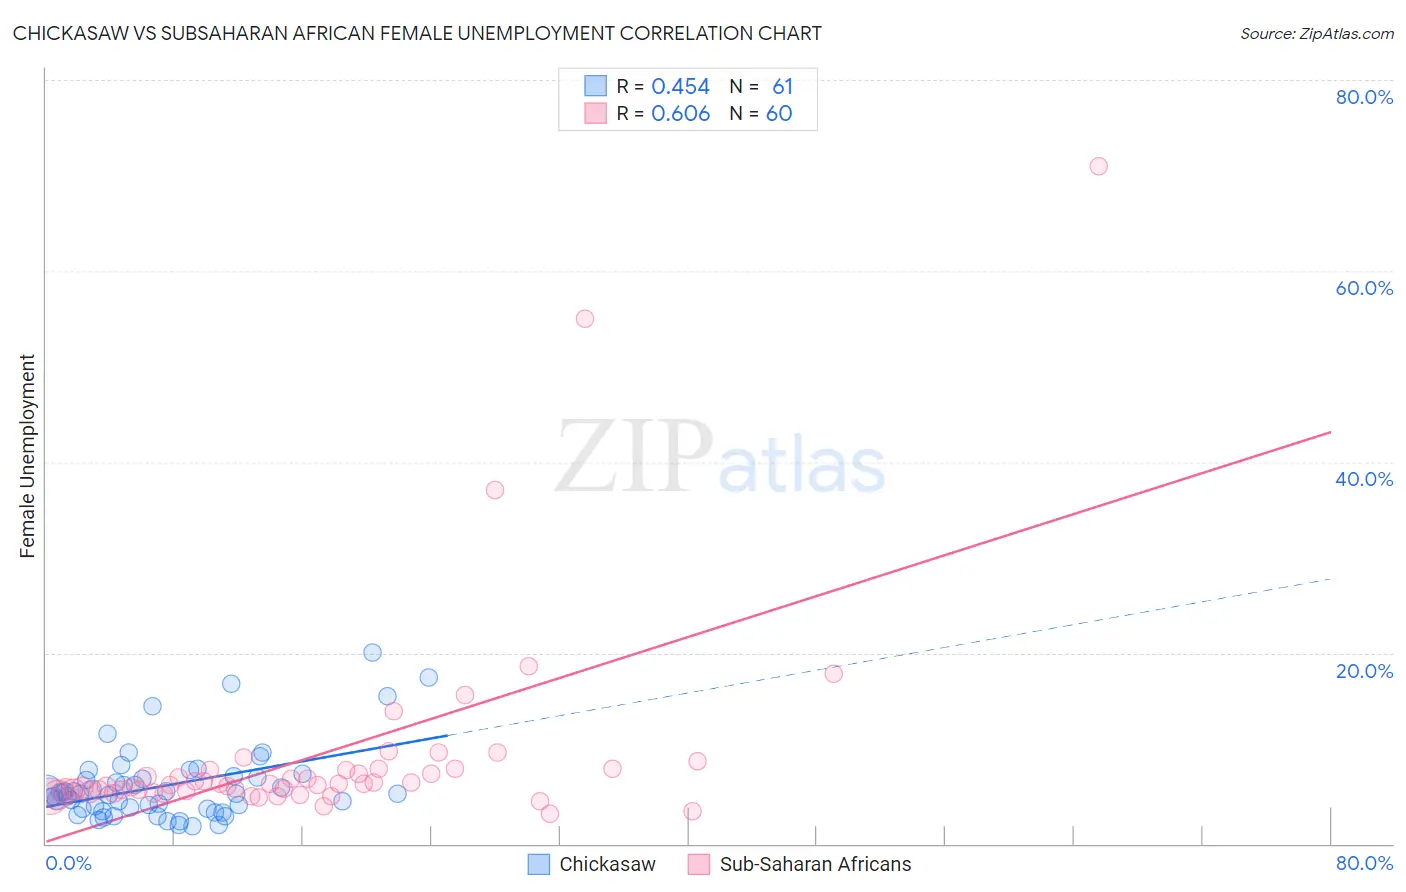 Chickasaw vs Subsaharan African Female Unemployment